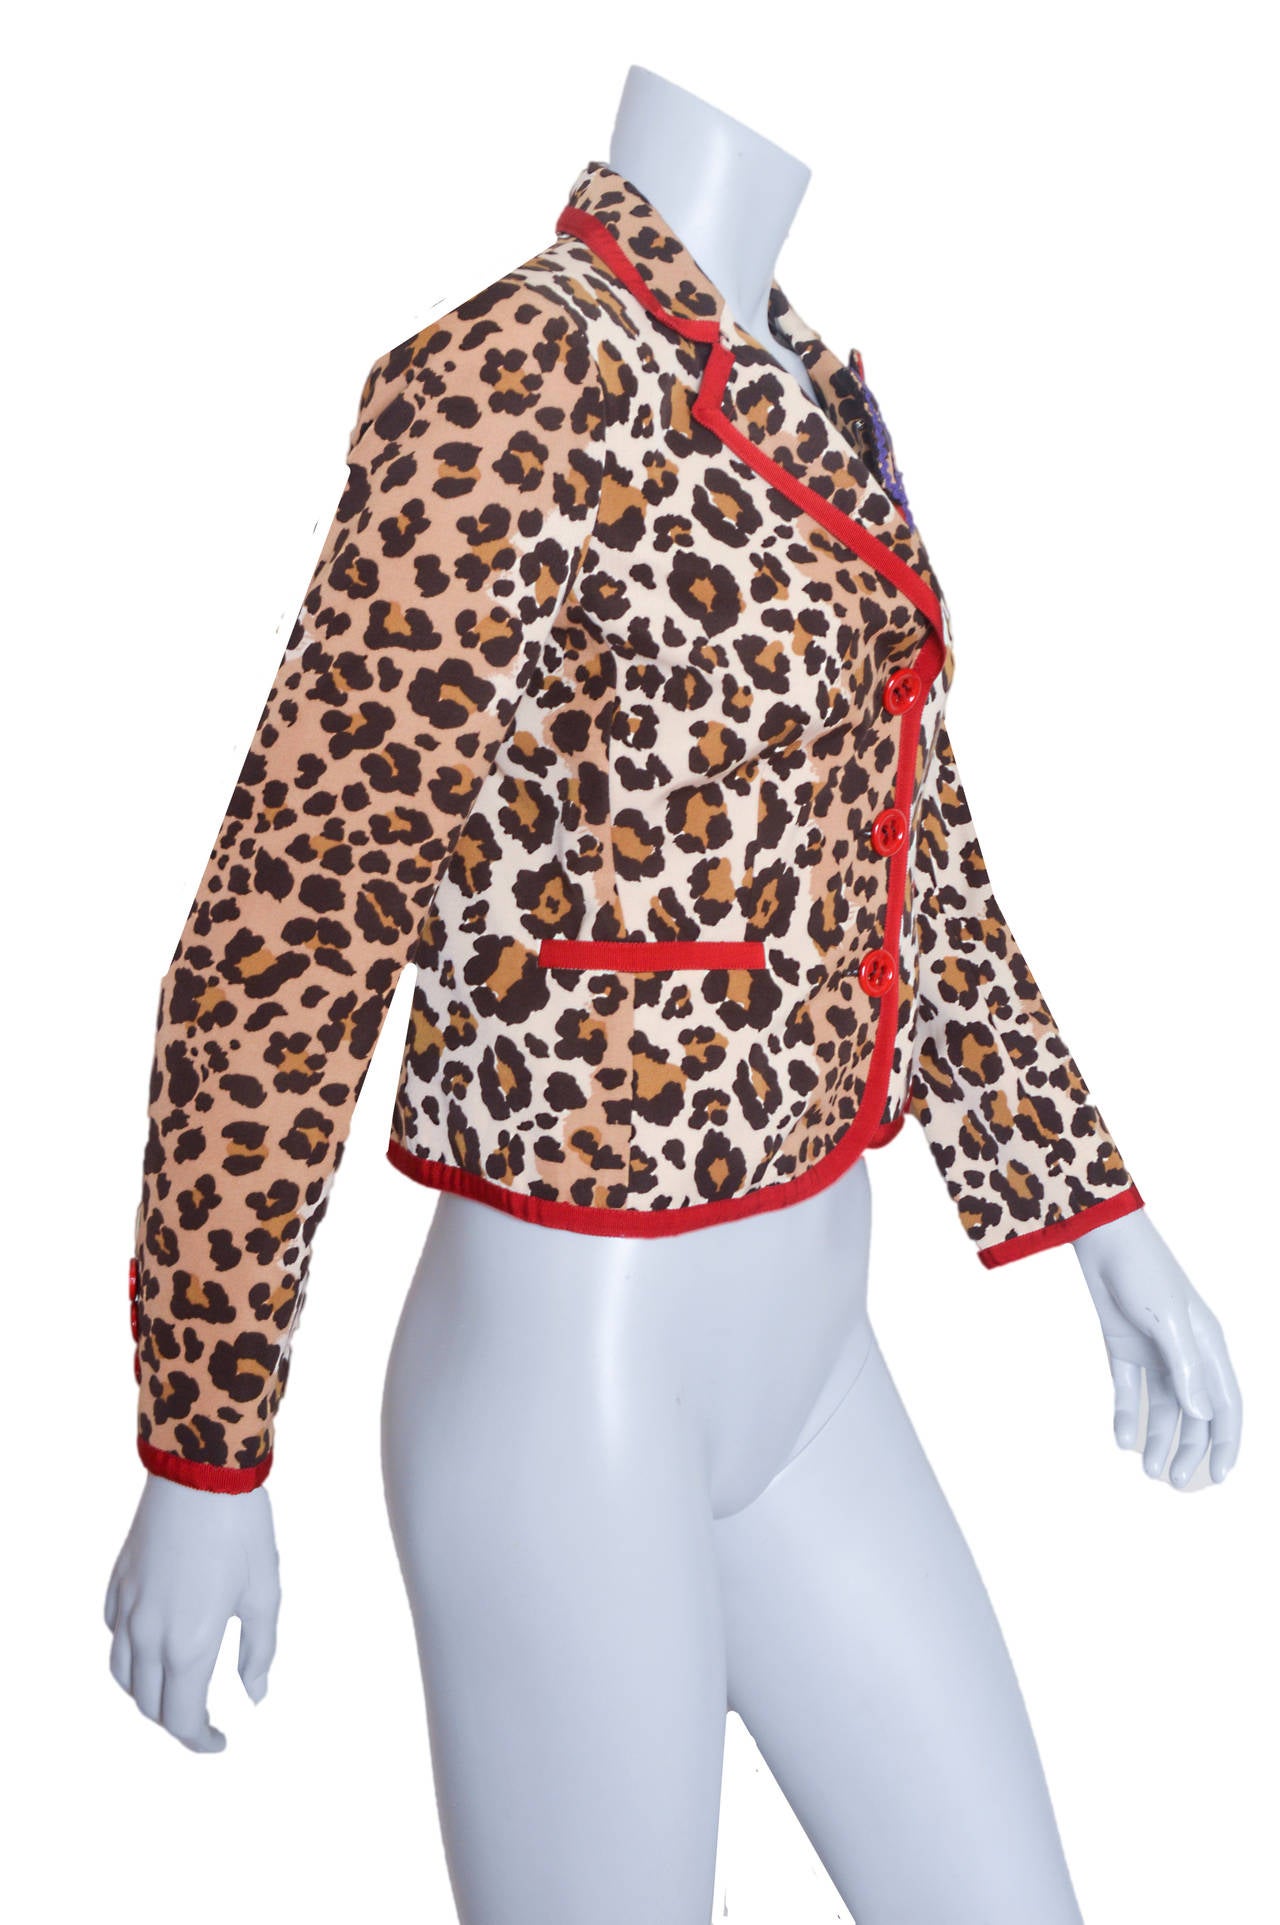 Whimsical Moschino Cheap and Chic cropped leopard print jacket.
Fitted shape.
Left lapel is embellished with kitty pin.
Pin features rick rack, buttons and sequins.
Jacket has red ribbon trim and three button closure.
Faux pockets.
Lined.